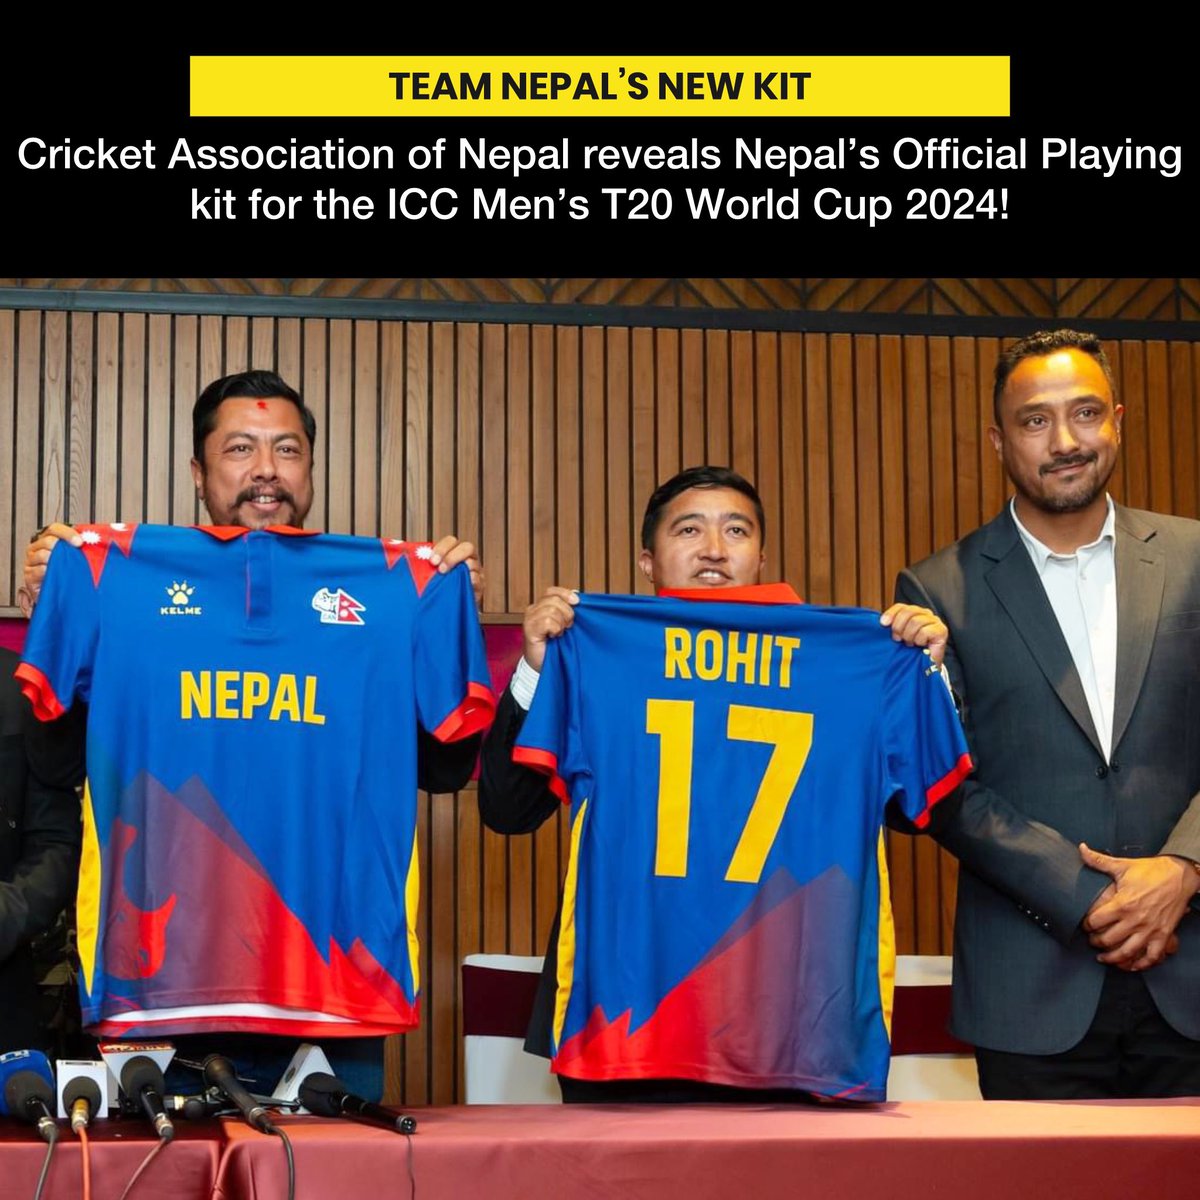 Cricket Association of Nepal (CAN) has revealed Nepal’s Official Playing kit for the ICC Men’s T20 World Cup 2024. 🏔️ 🦏 

Photo: CAN
What do you think about this new kit? Rate it out of 10. 
#cricket #nepal #iccworldcup #nonextquestion